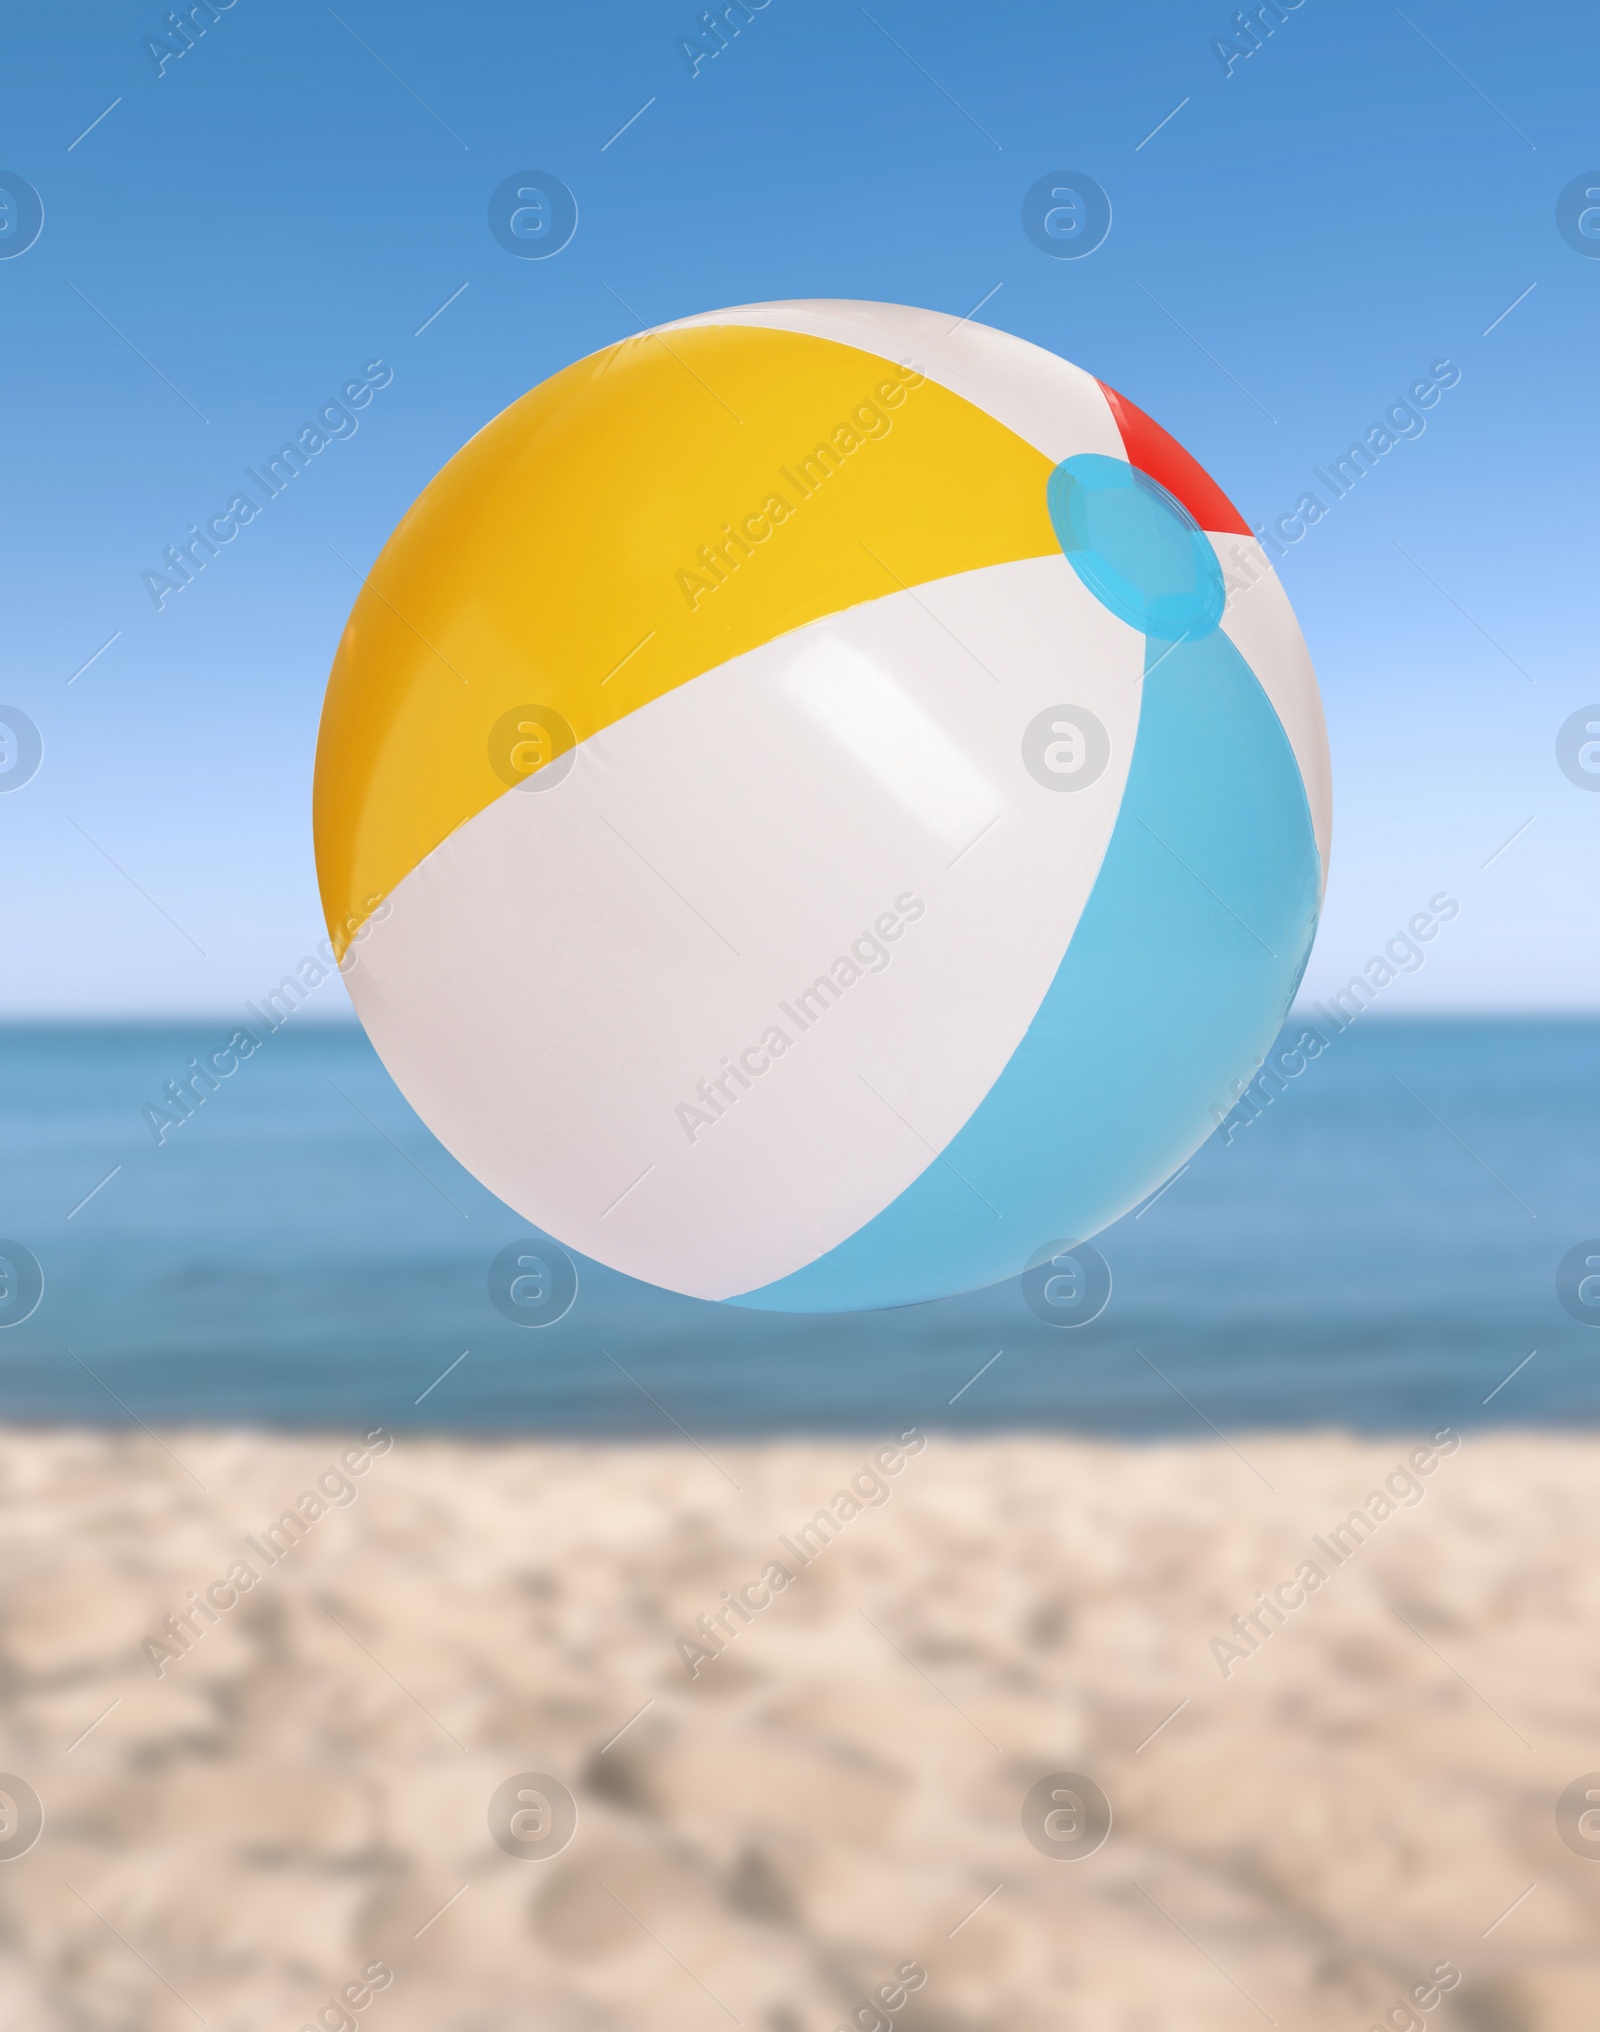 Image of Colorful inflatable beach ball and seascape on background